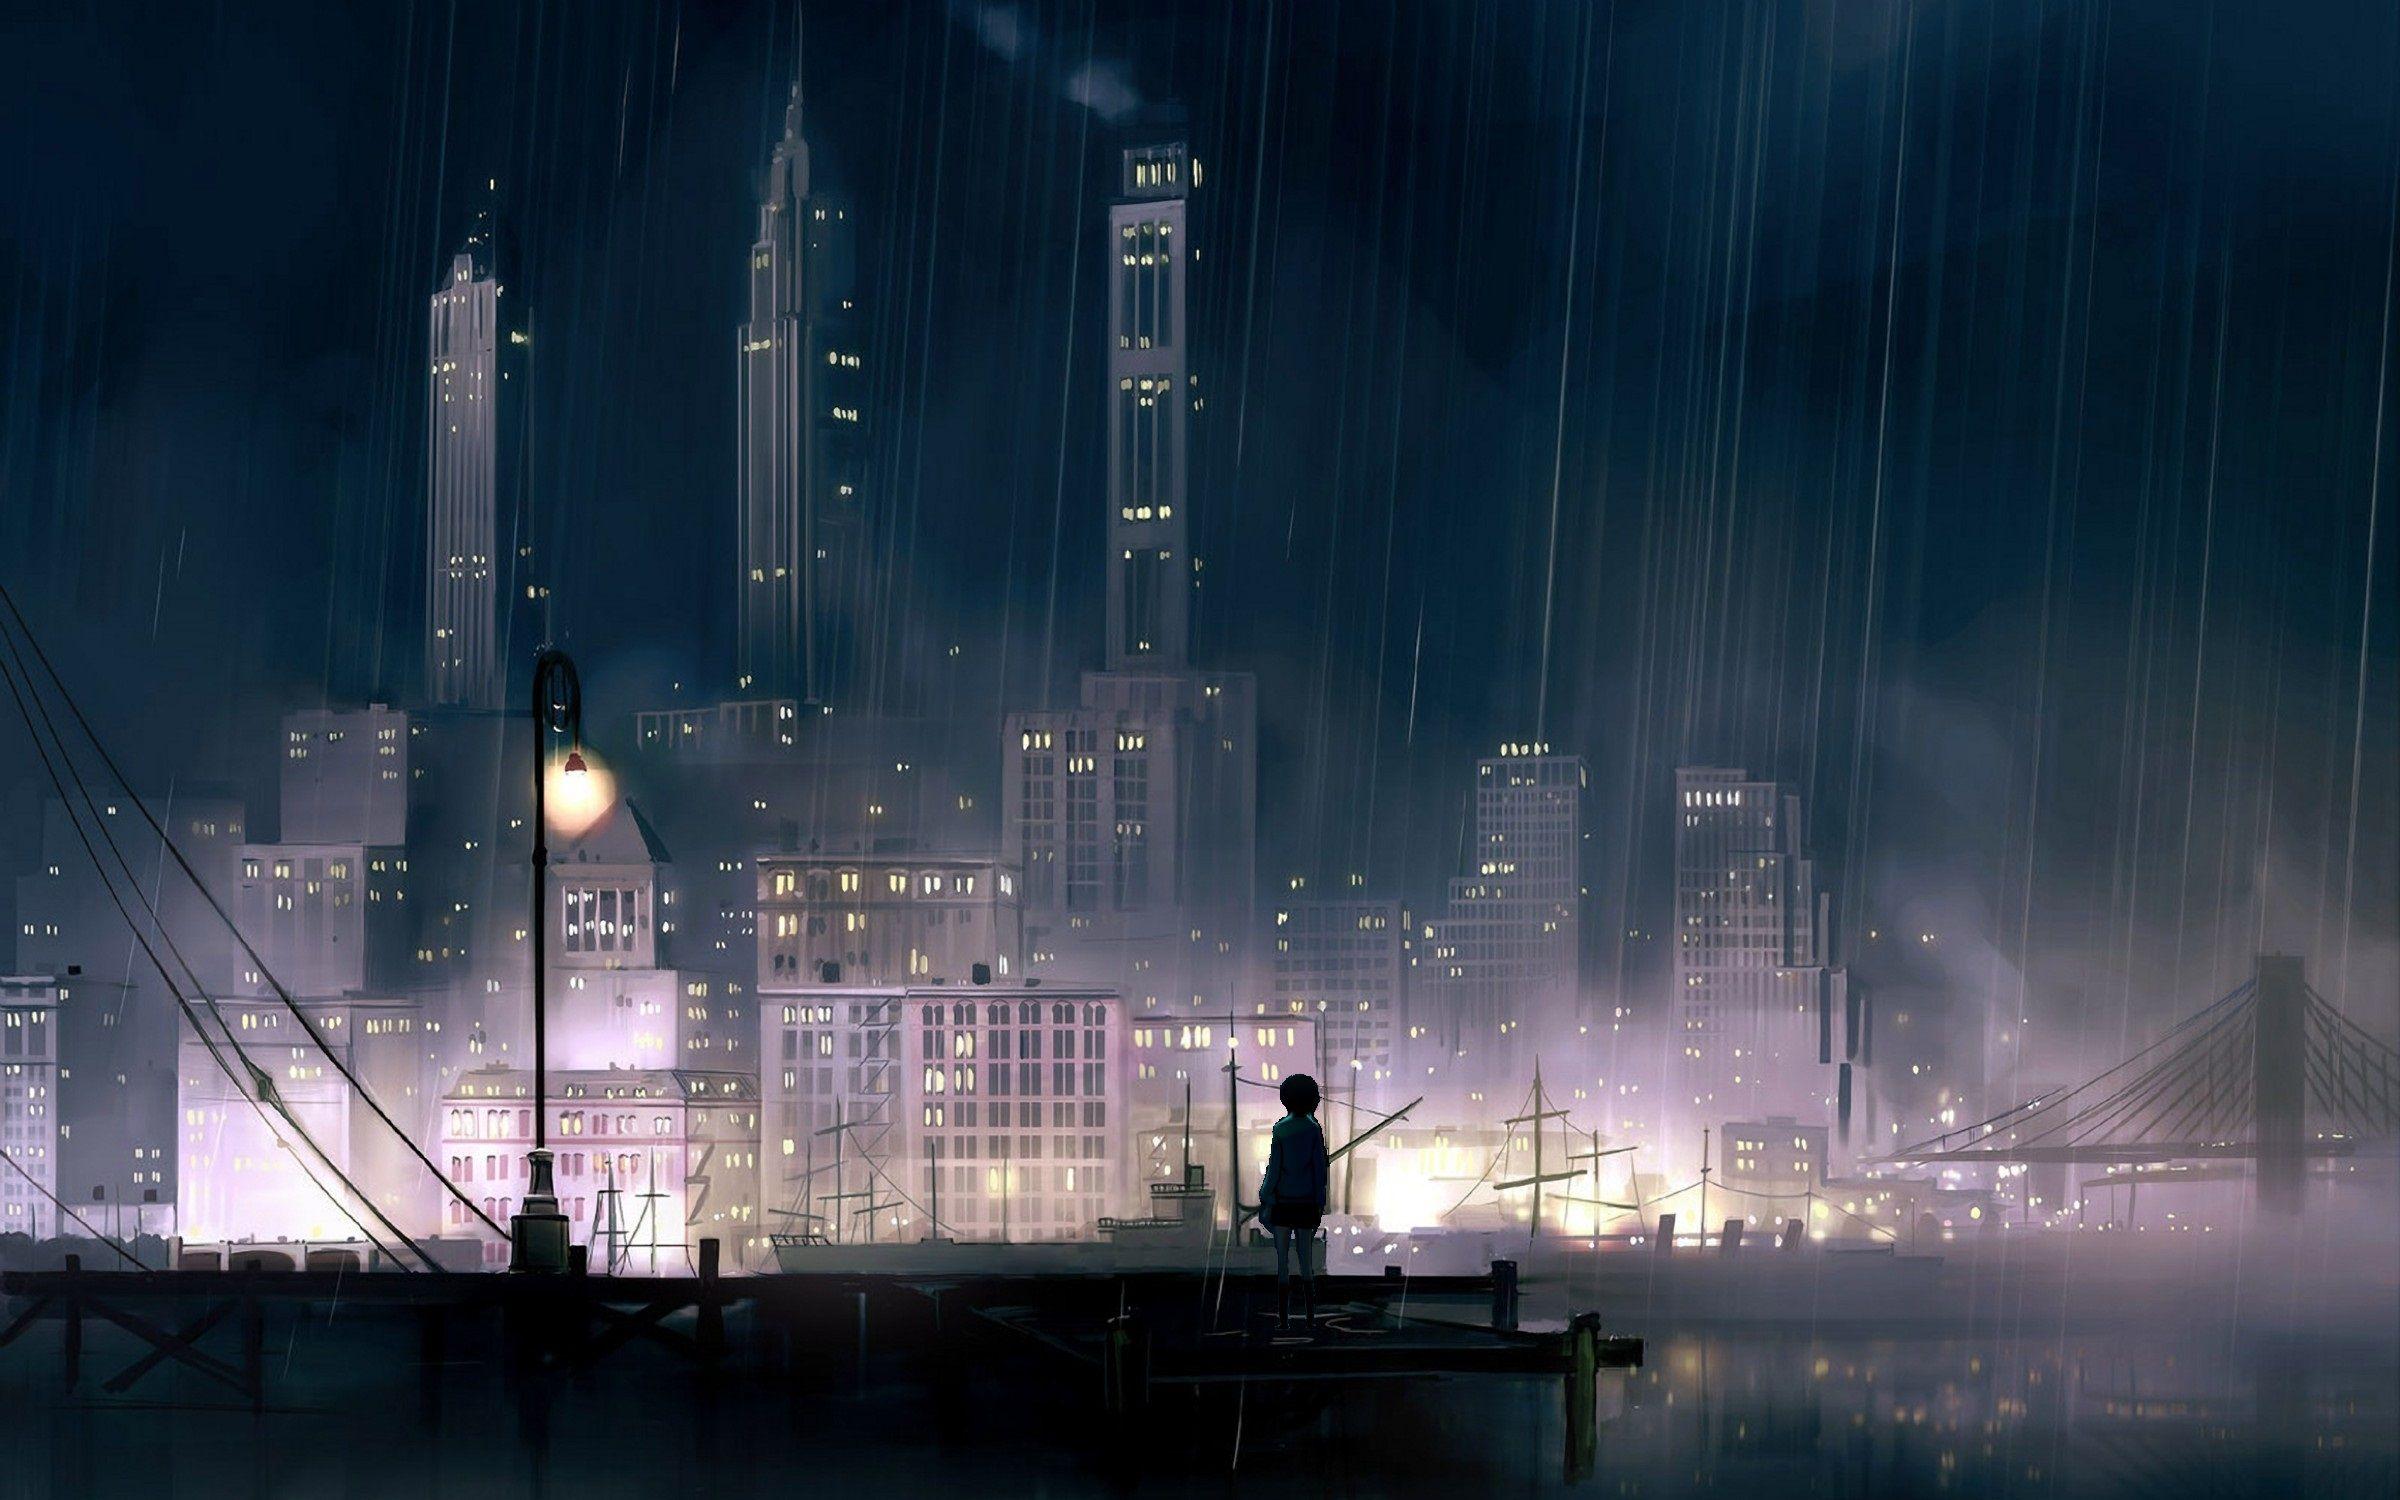 Anime Cityscape wallpapers in 2019.